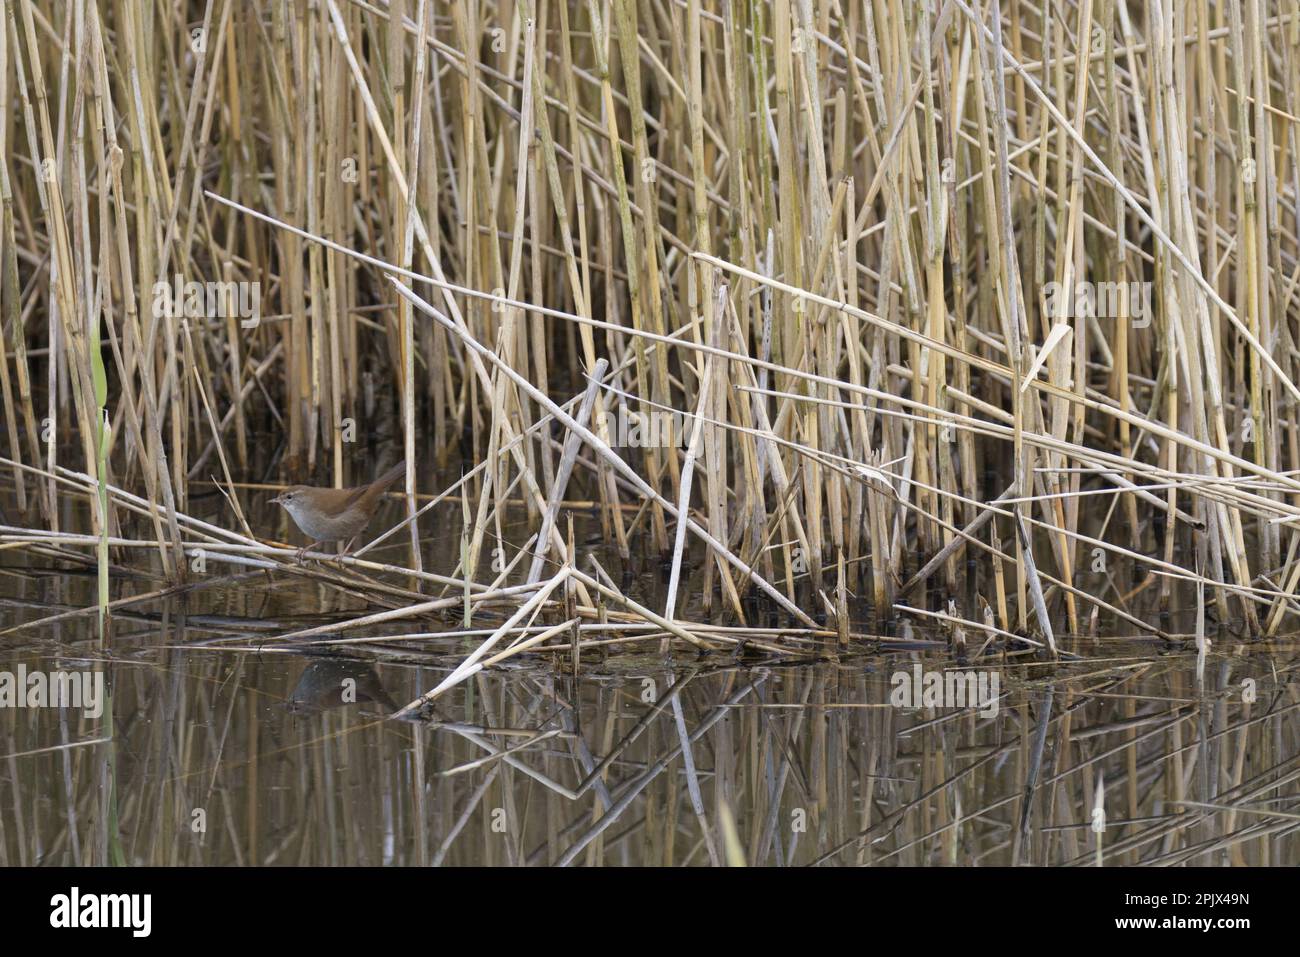 Reed Warbler - Acrocephalus scirpaceus - reflected in the water. Stock Photo